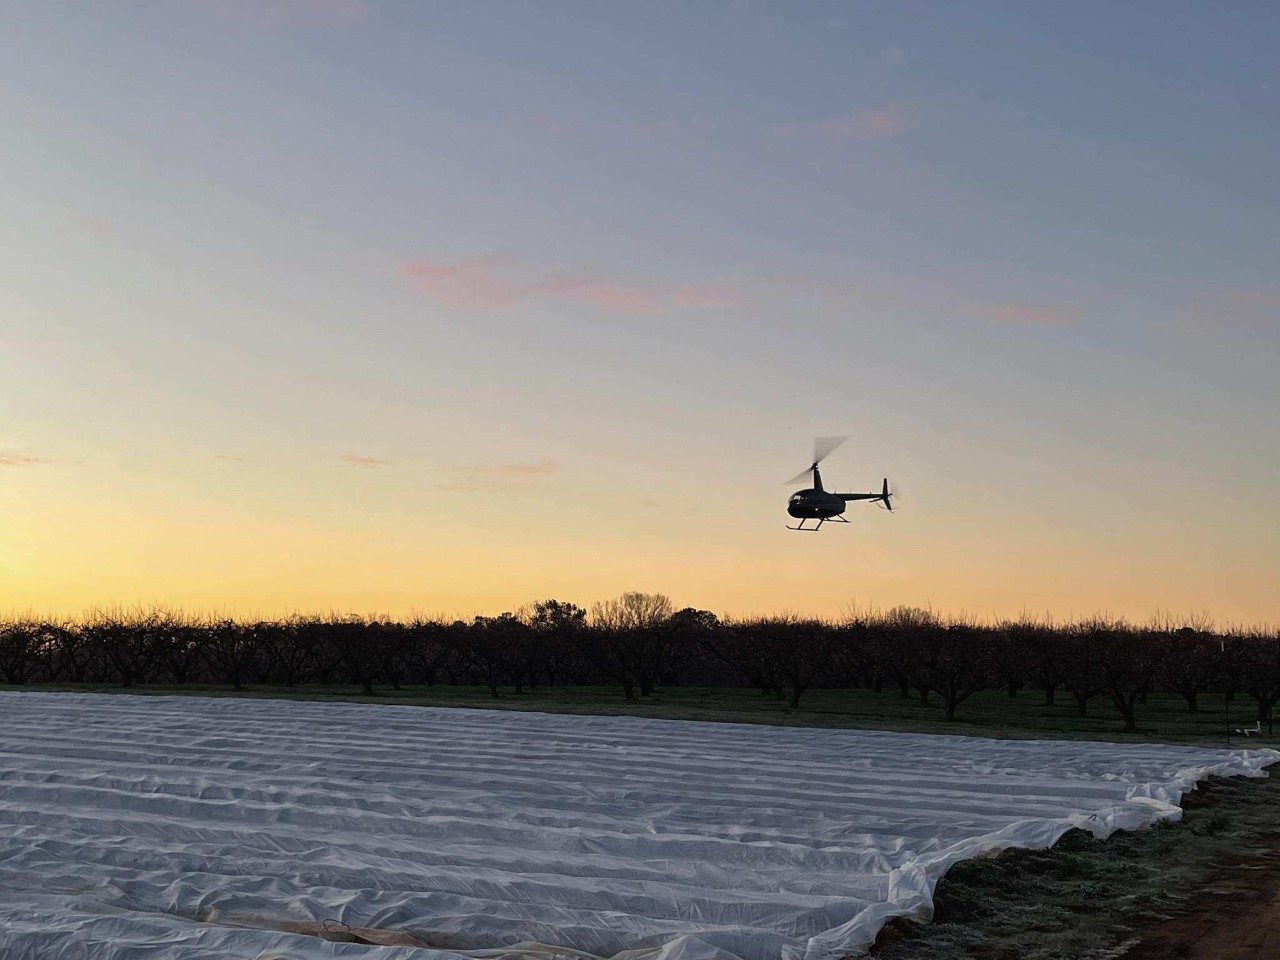 A drone hovers over crop rows covered in light-colored protective fabric